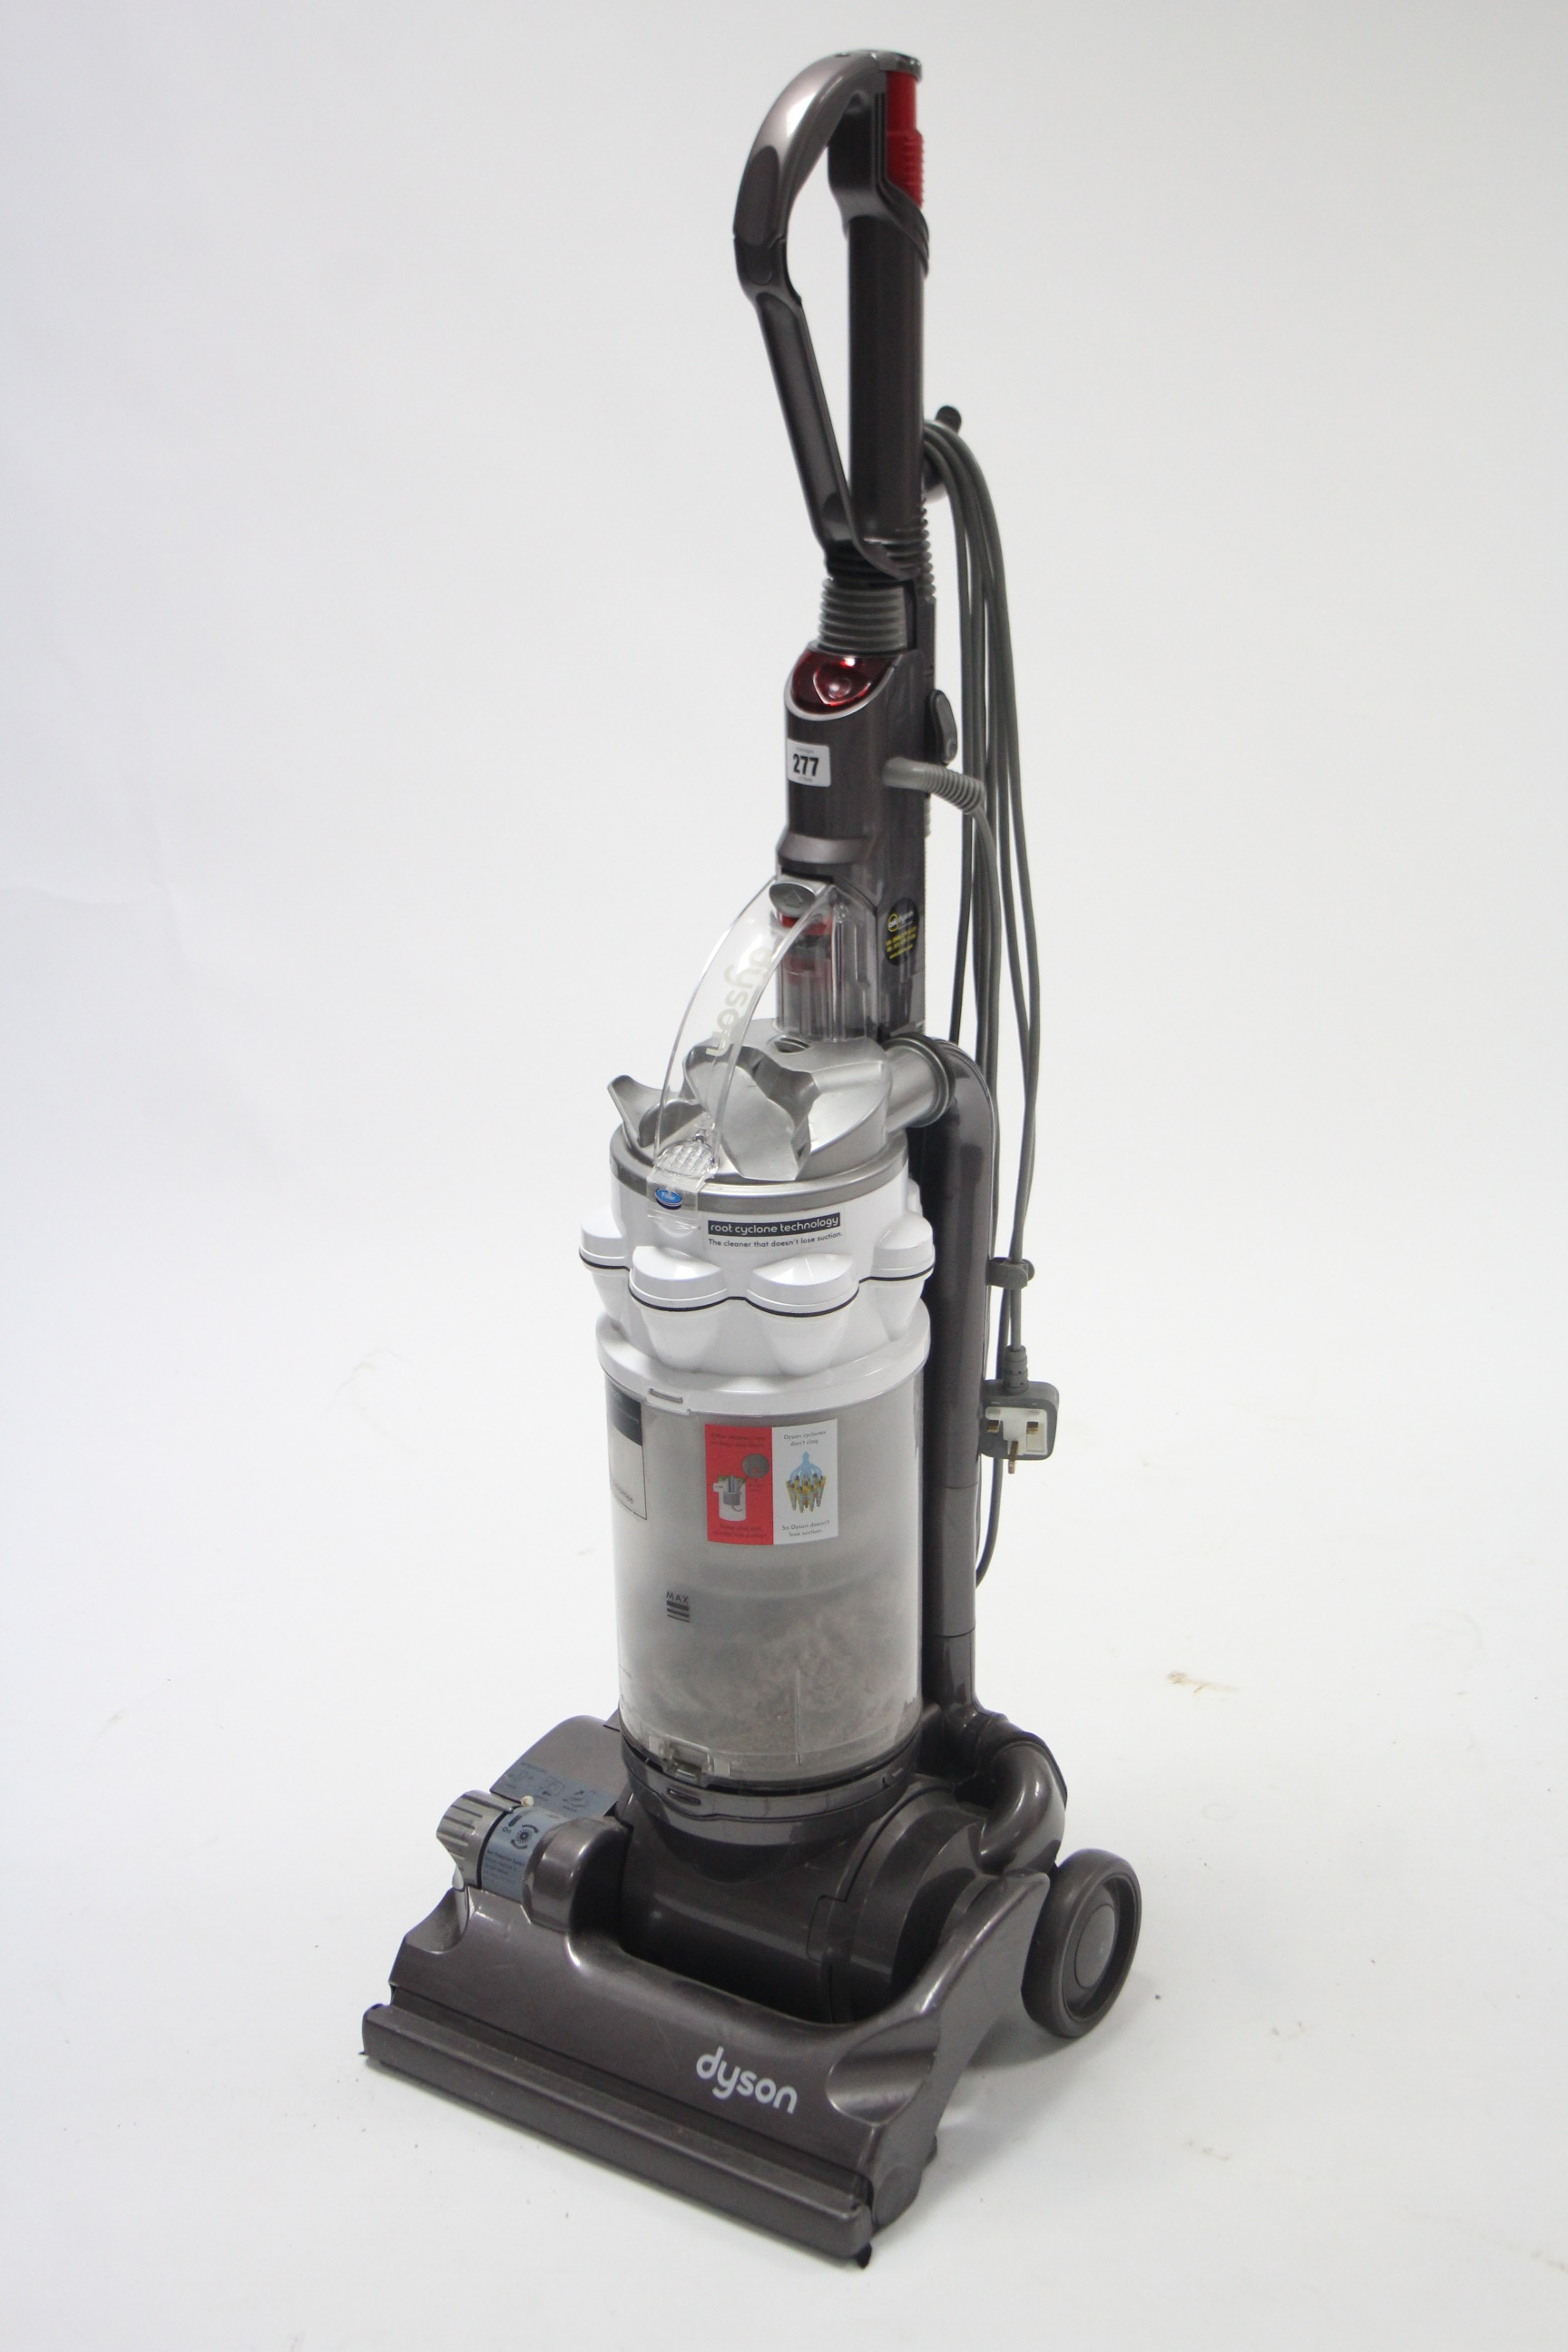 A Dyson upright vacuum cleaner, w.o.